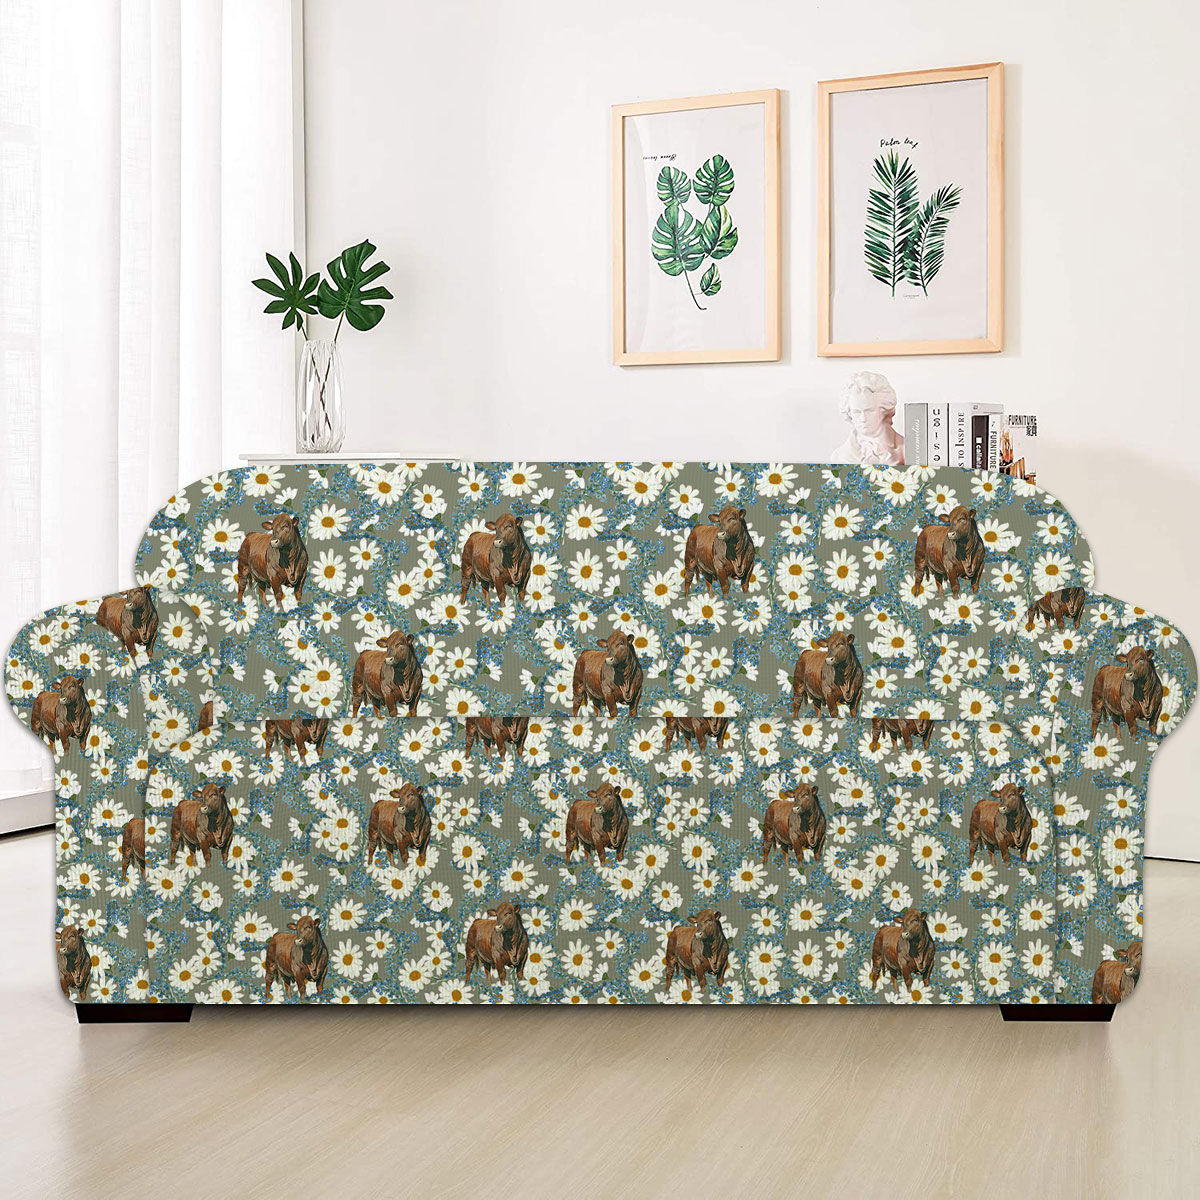 Beefmaster Camomilles Flower Grey Pattern Sofa Cover